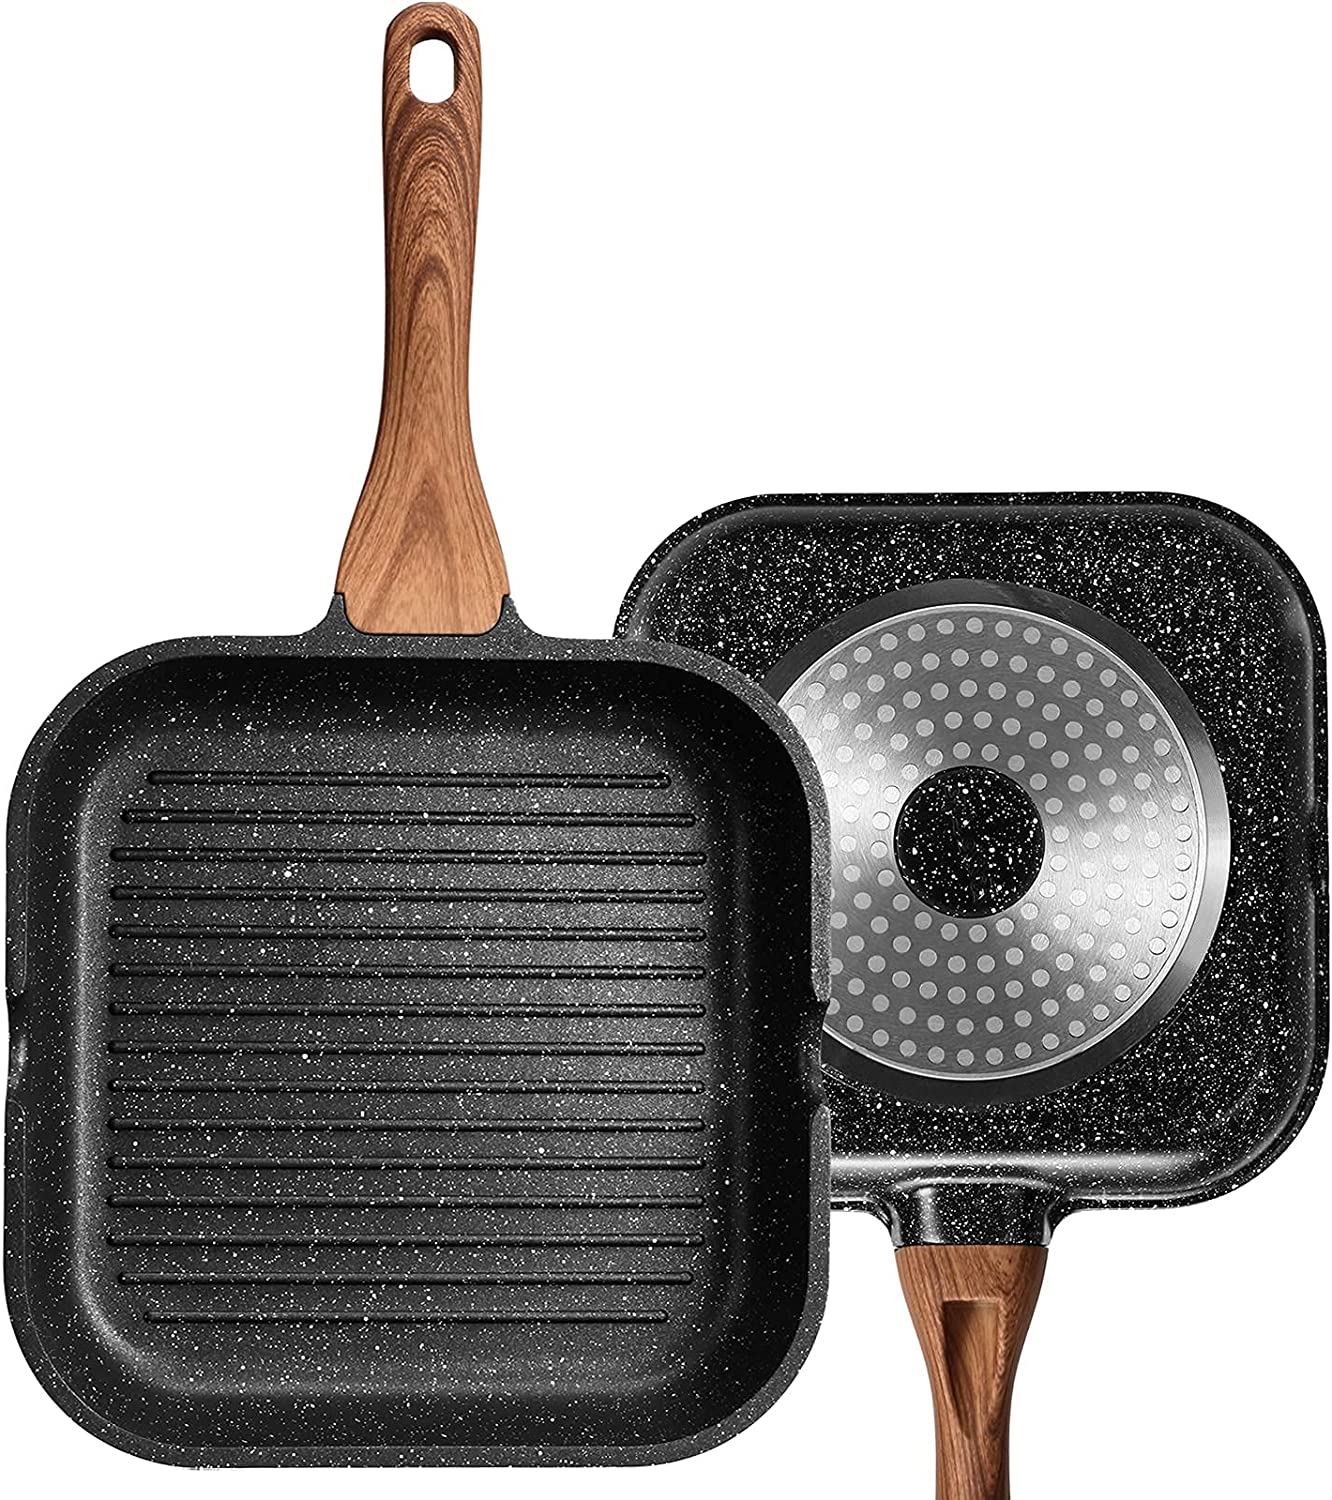 ESLITE LIFE 9.5 Inch Nonstick Grill Pan